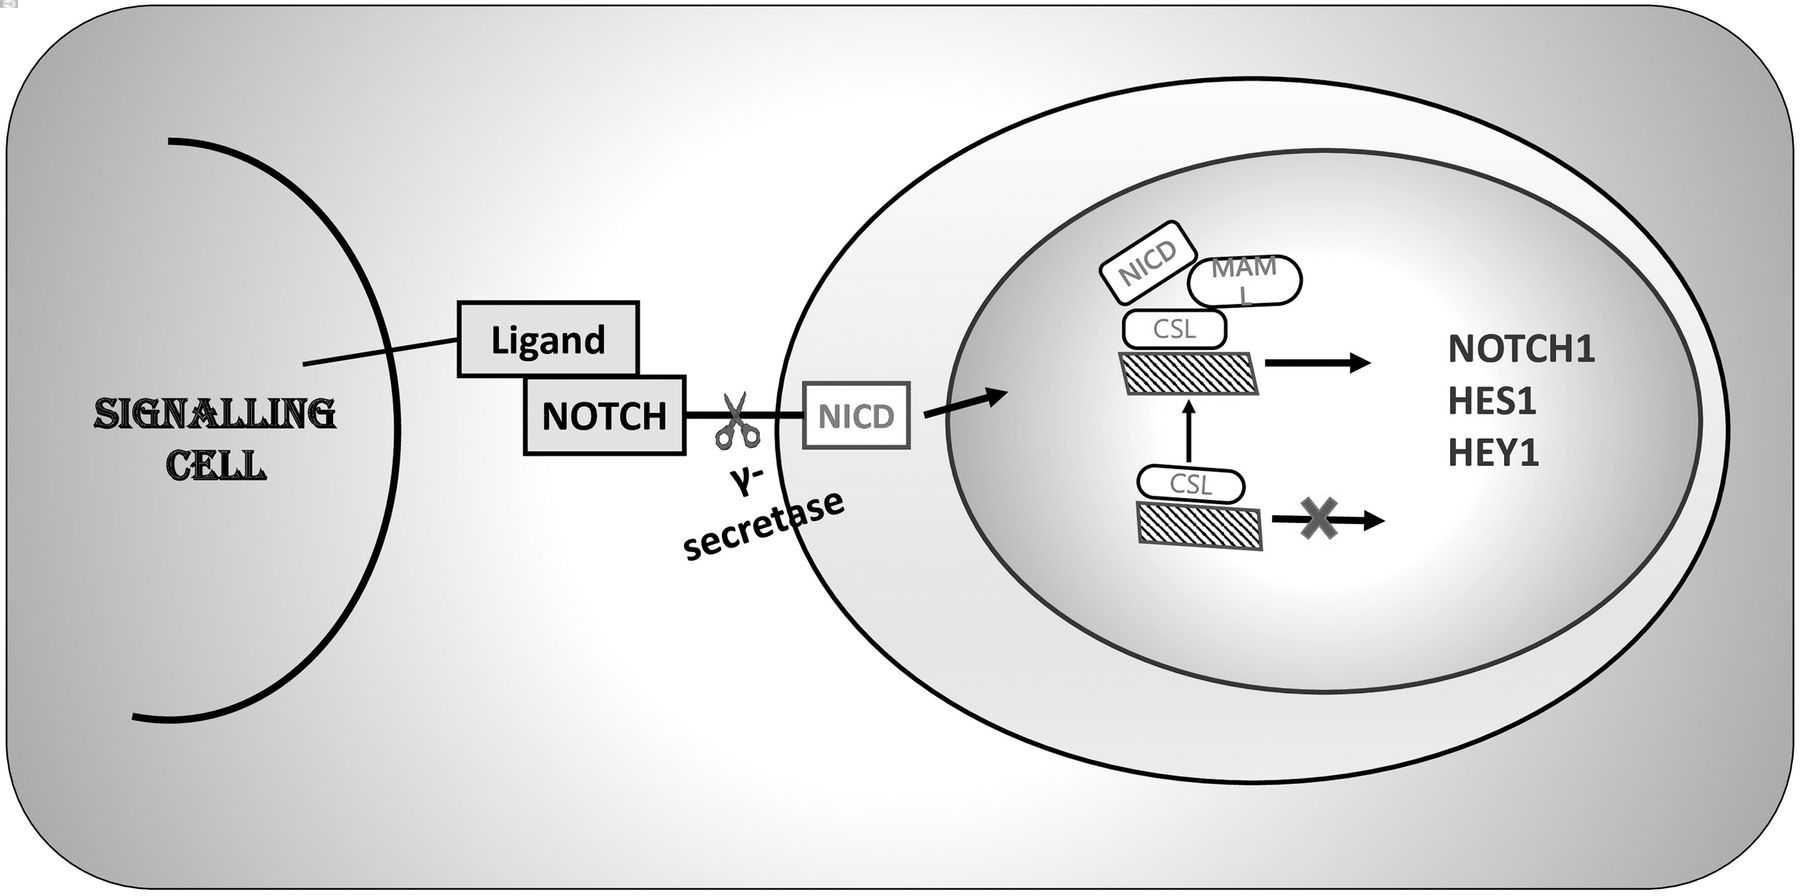 25-facts-about-notch-signaling-pathway